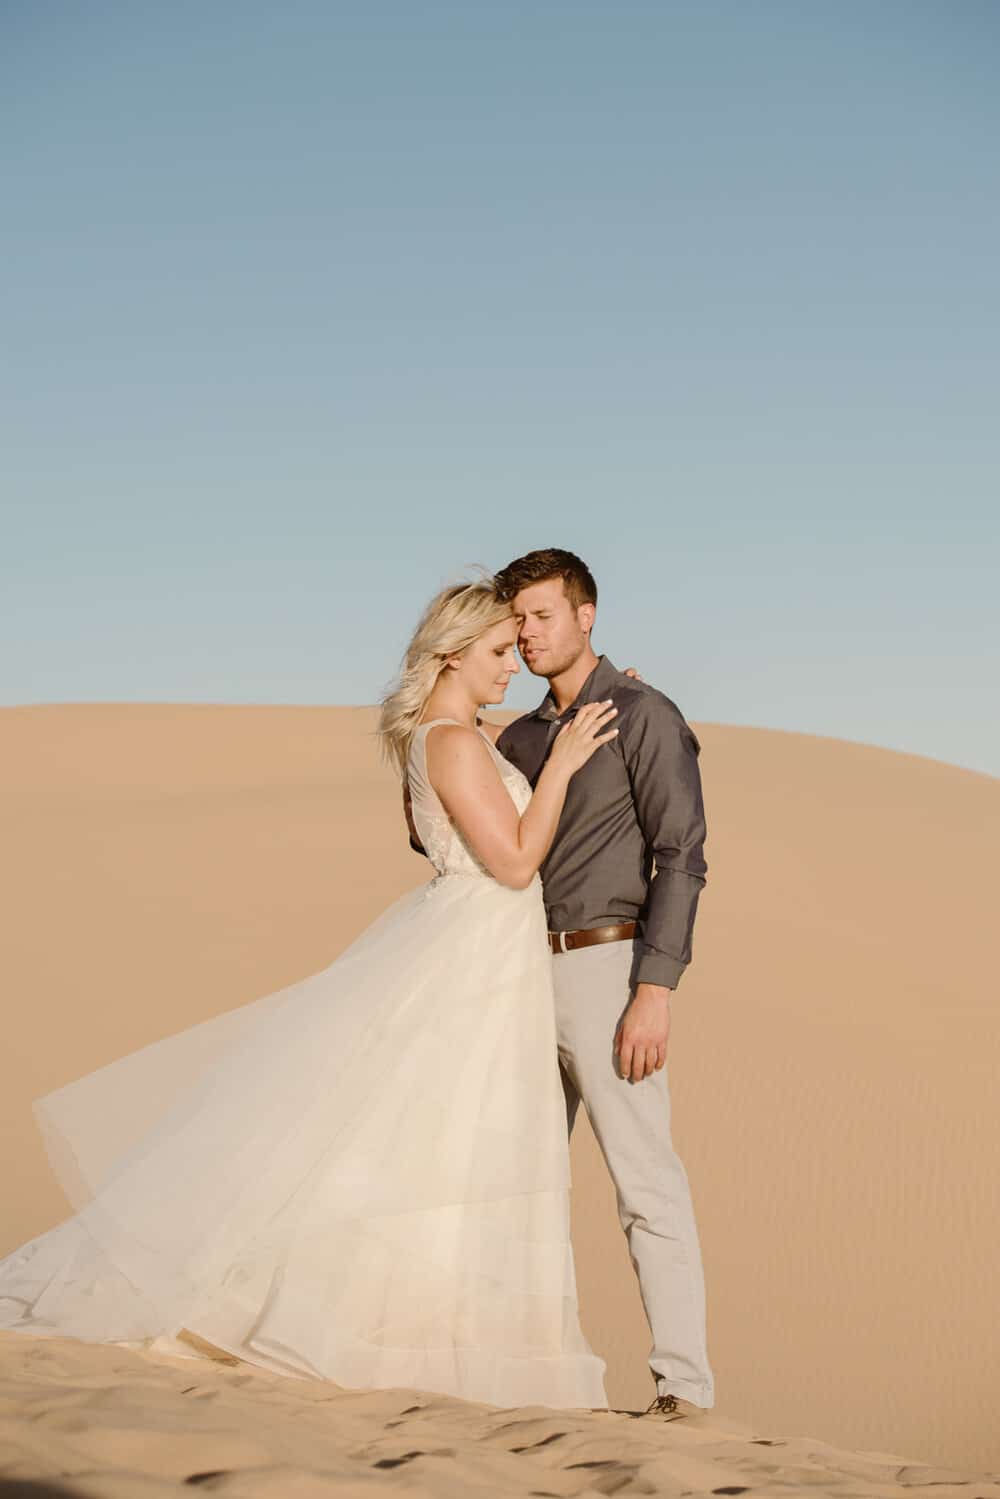 A bride and groom stand together on a sand dune in the middle of the day.